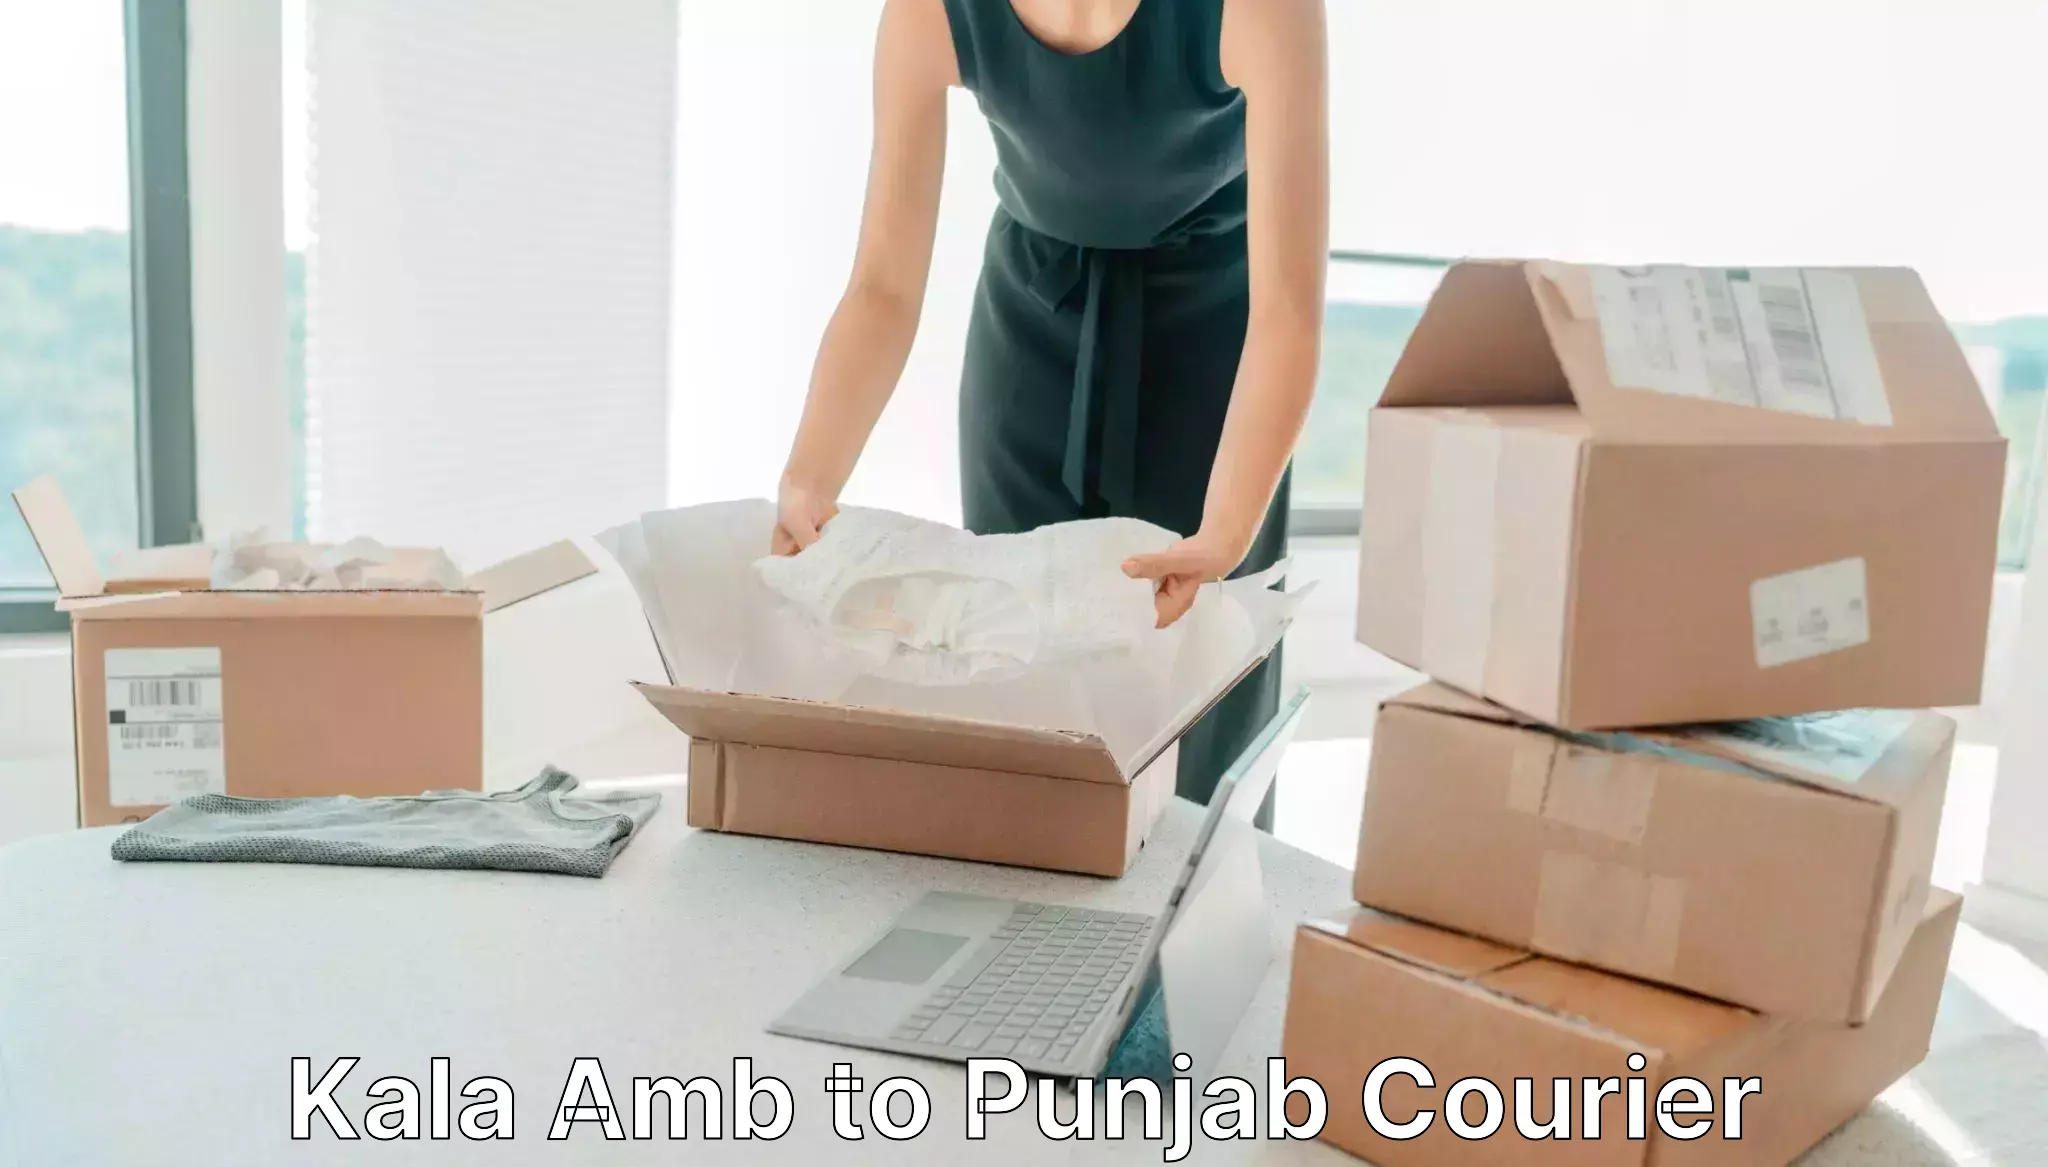 User-friendly delivery service in Kala Amb to Punjab